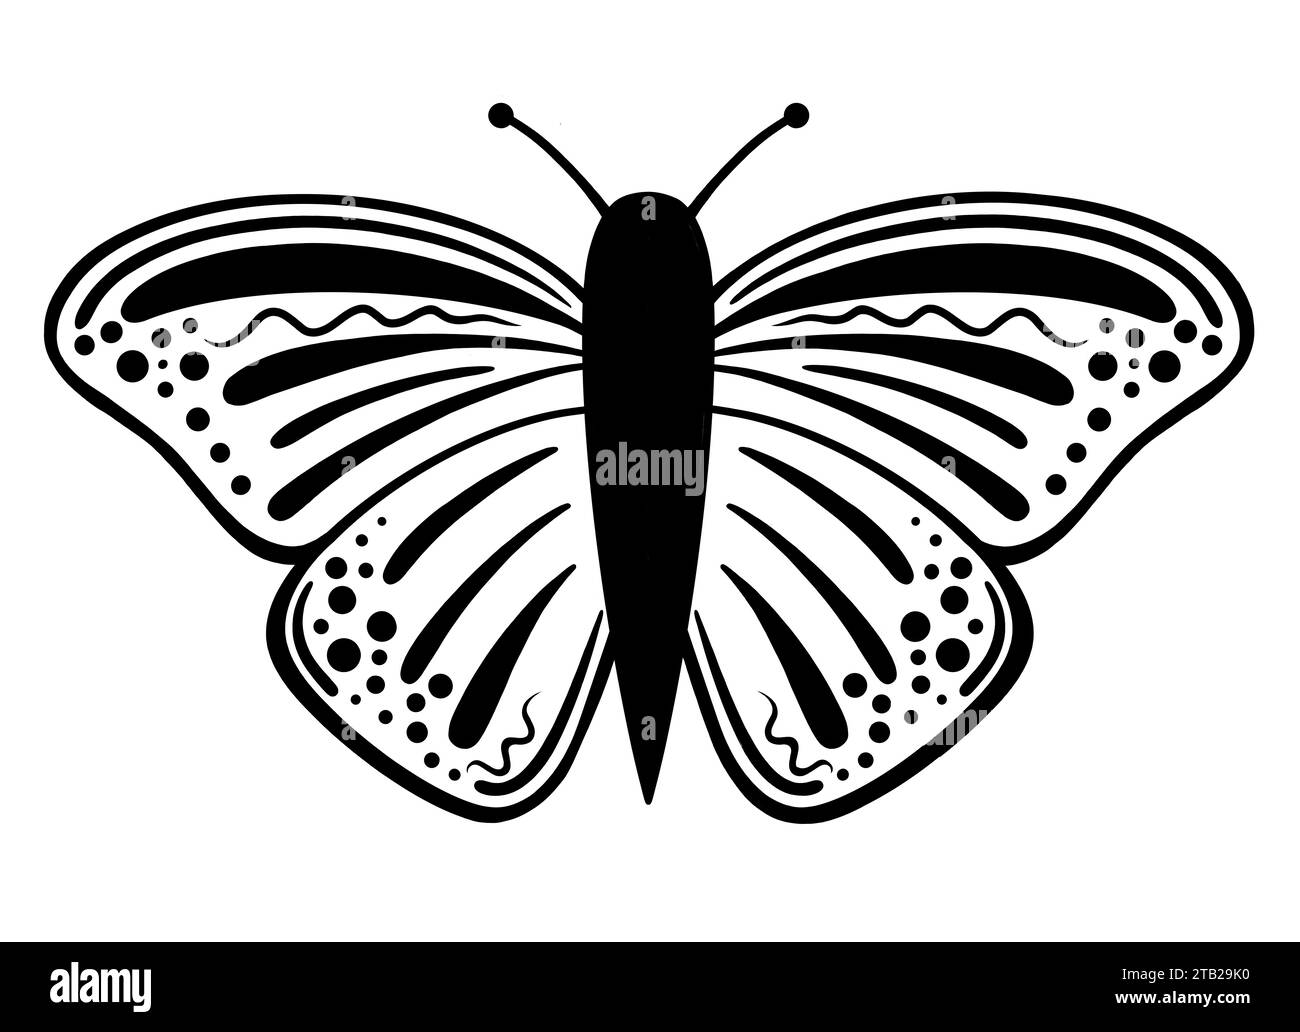 Butter fly Black and White Stock Photos & Images - Alamy